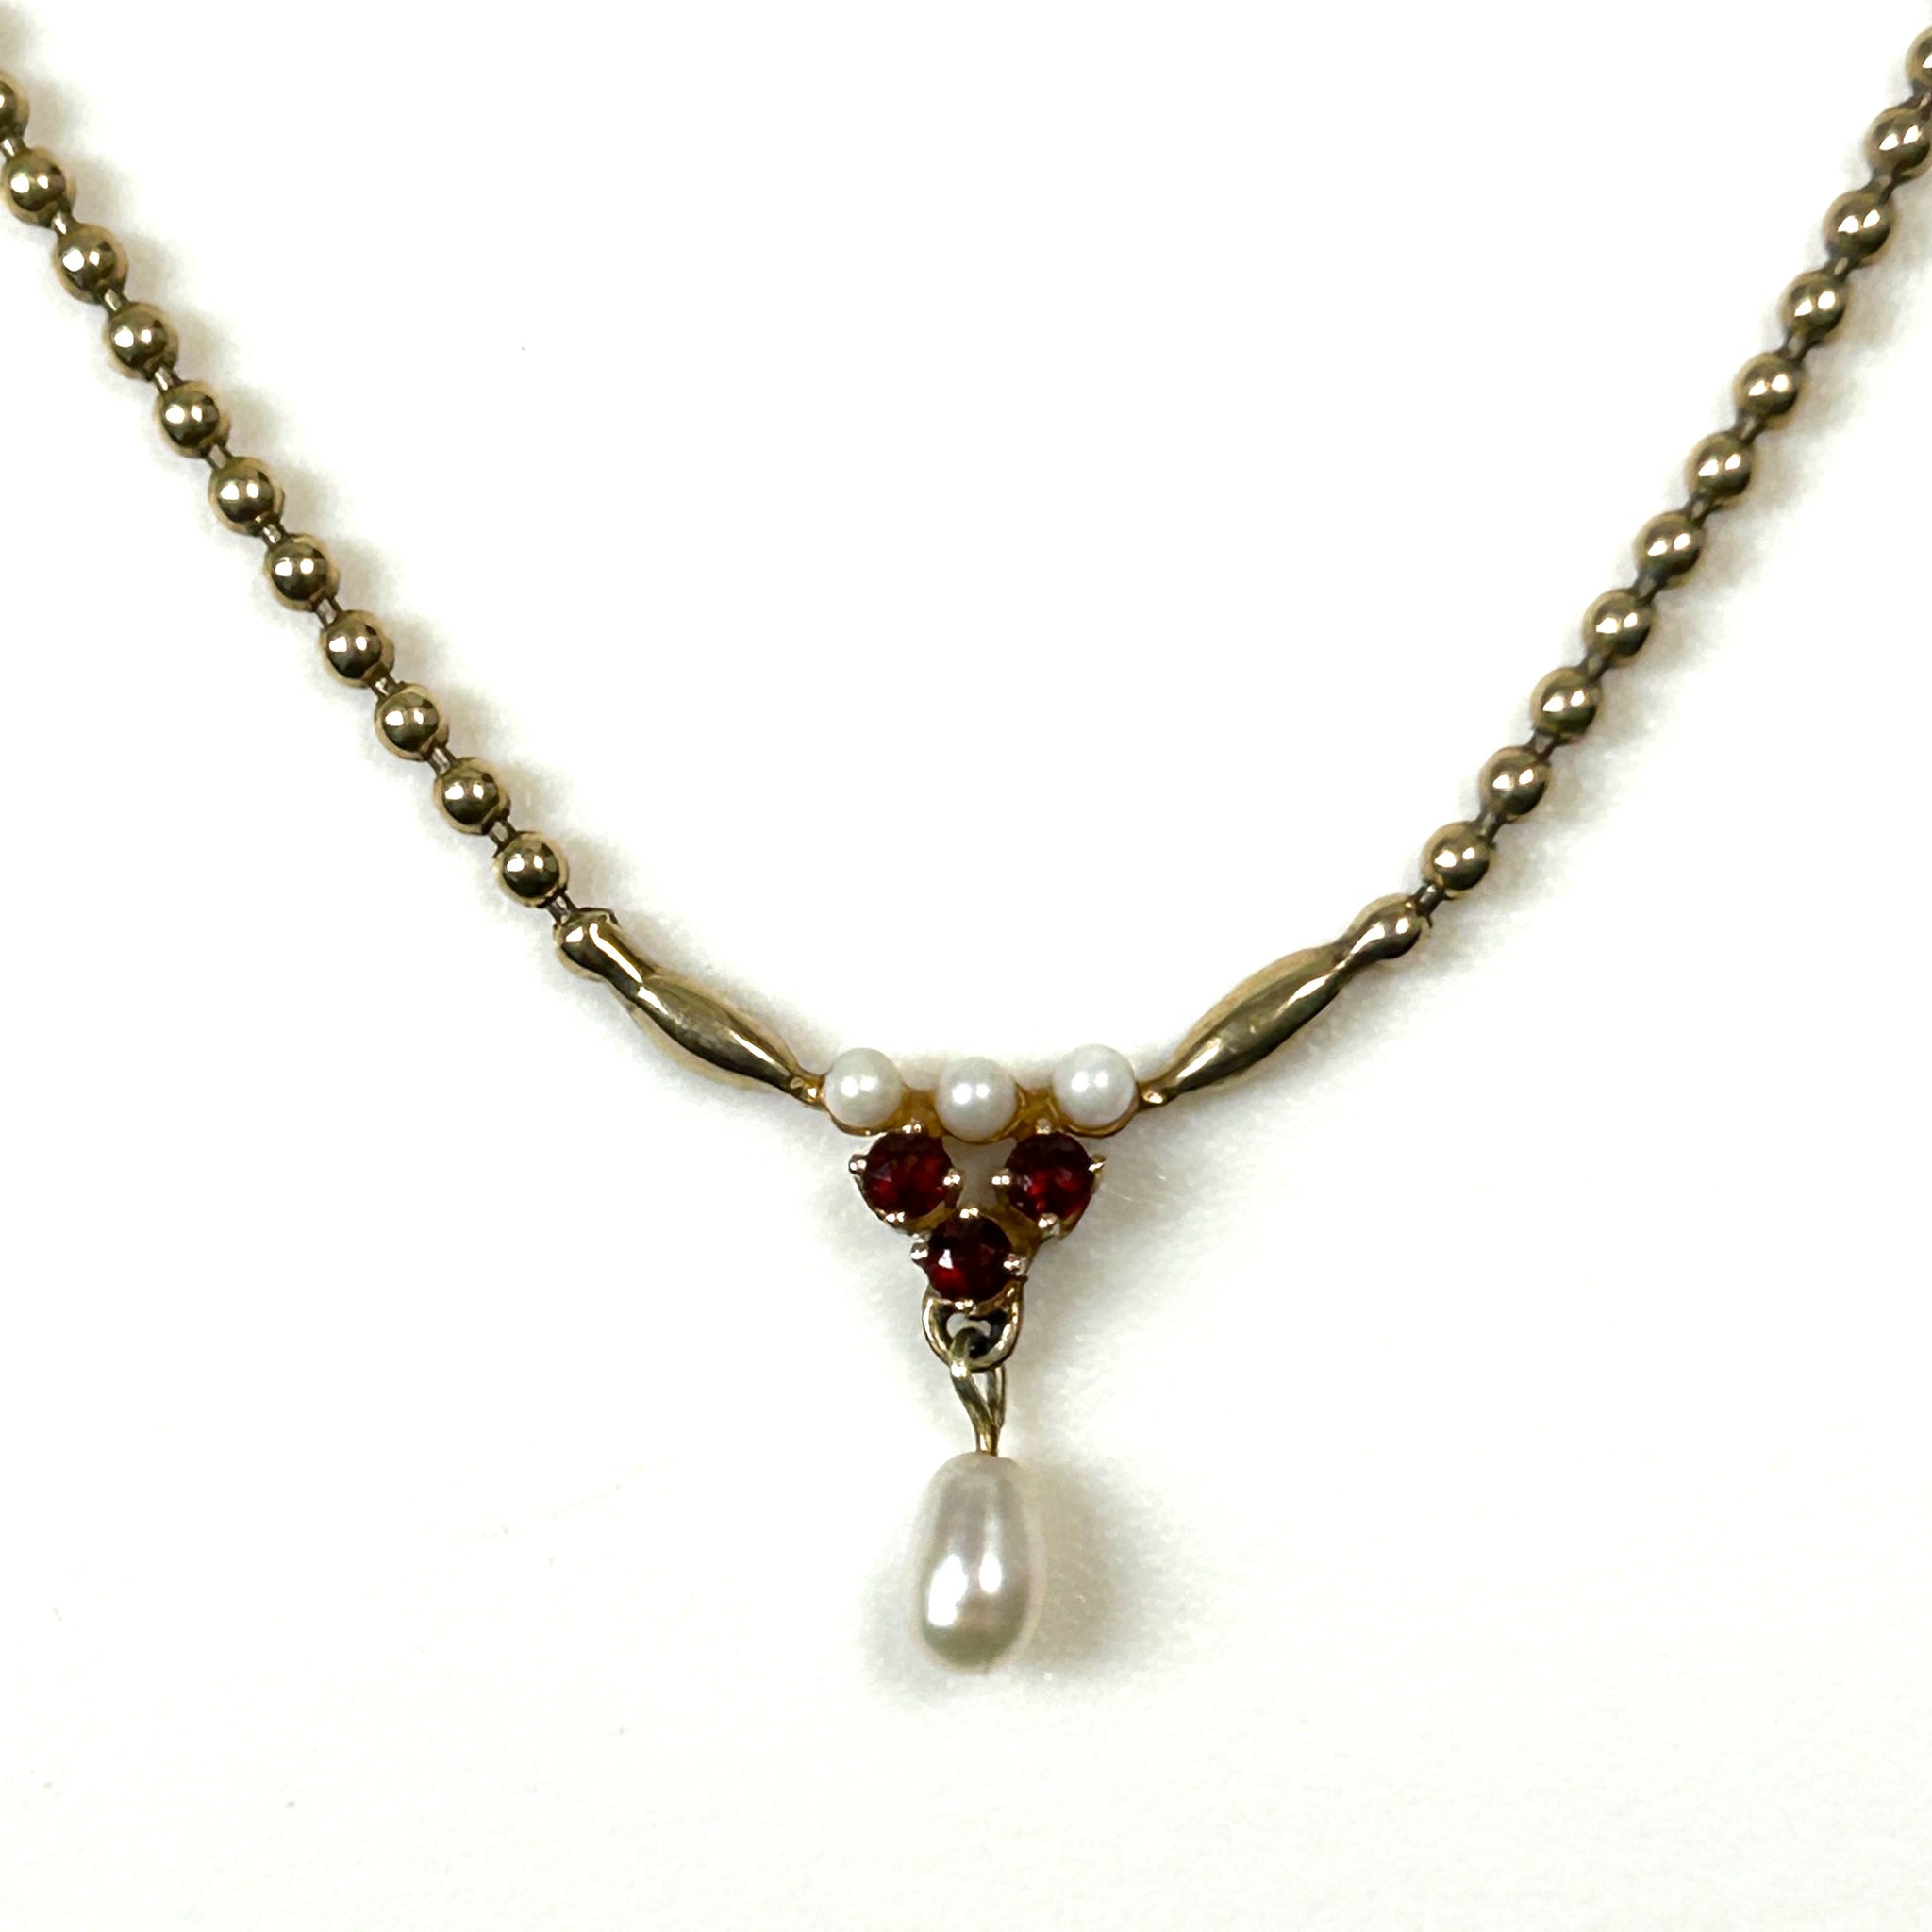 Vintage 9ct Gold, Pearl and Garnet Necklace